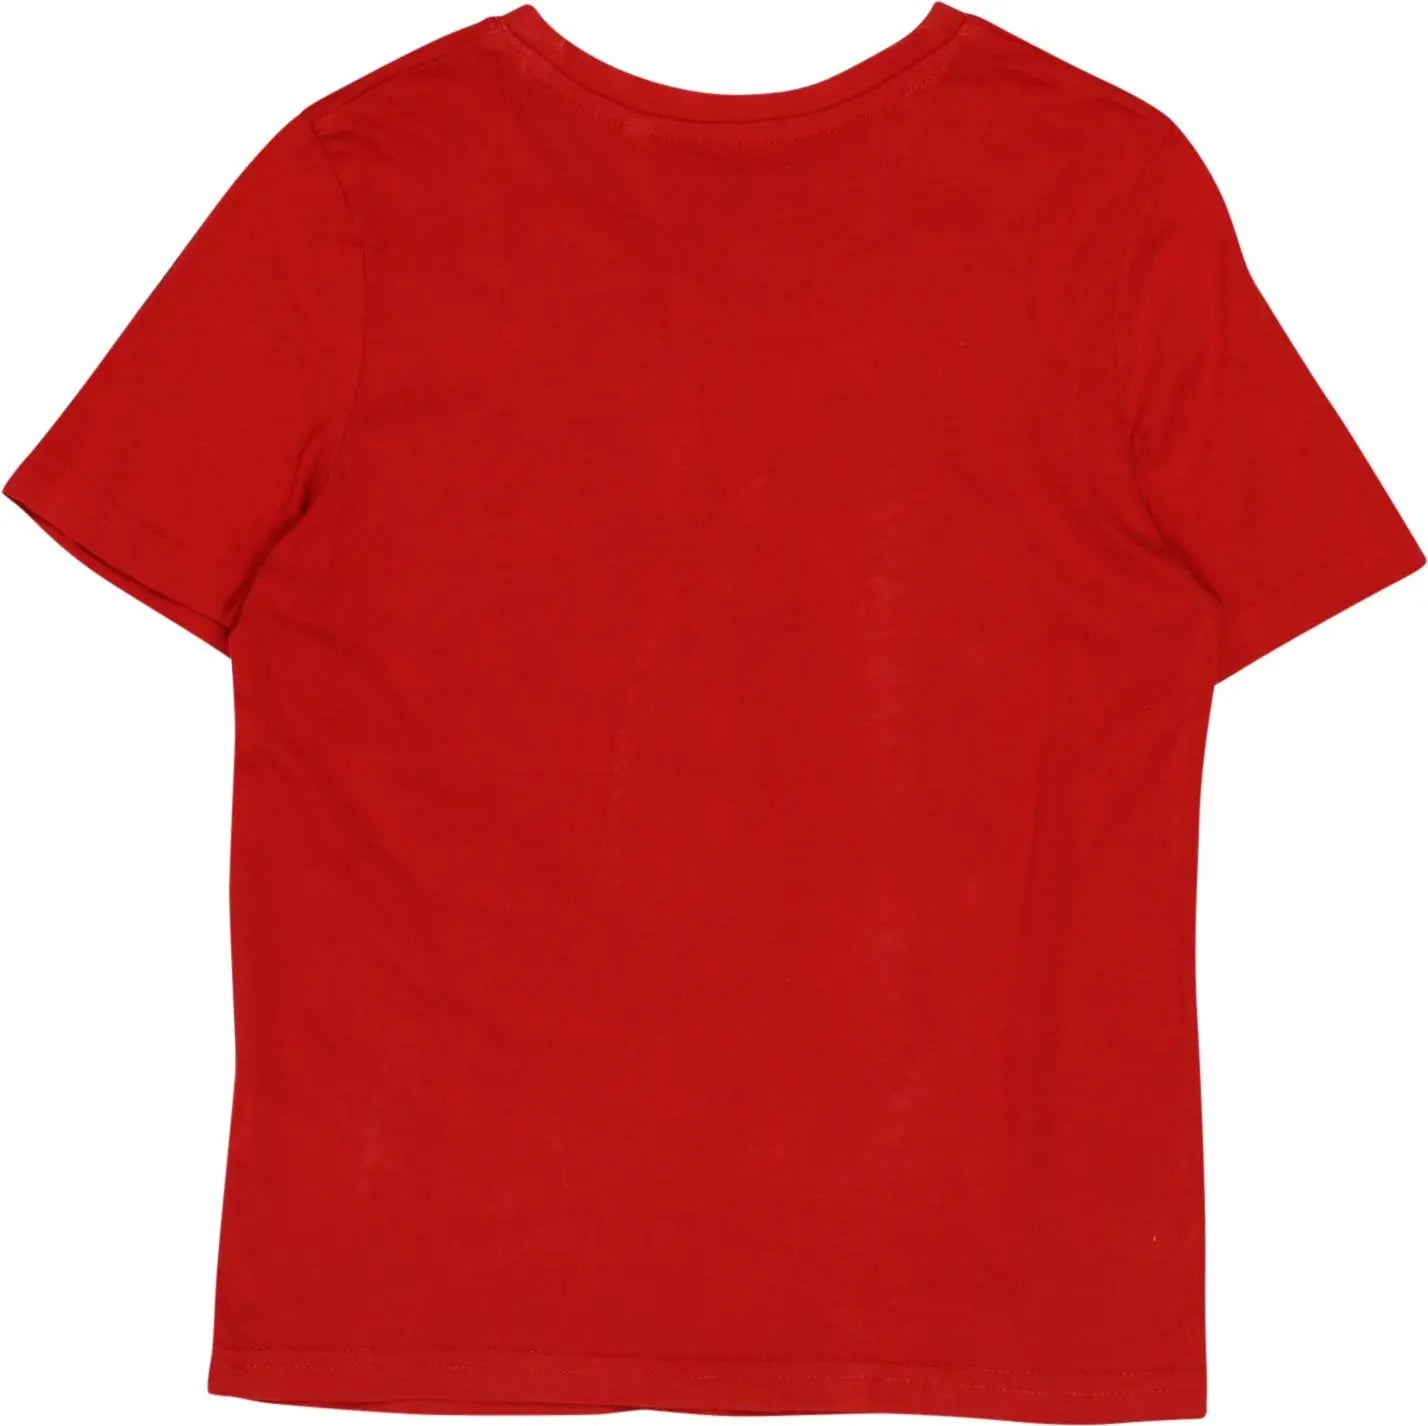 C&A - Red T-shirt- ThriftTale.com - Vintage and second handclothing